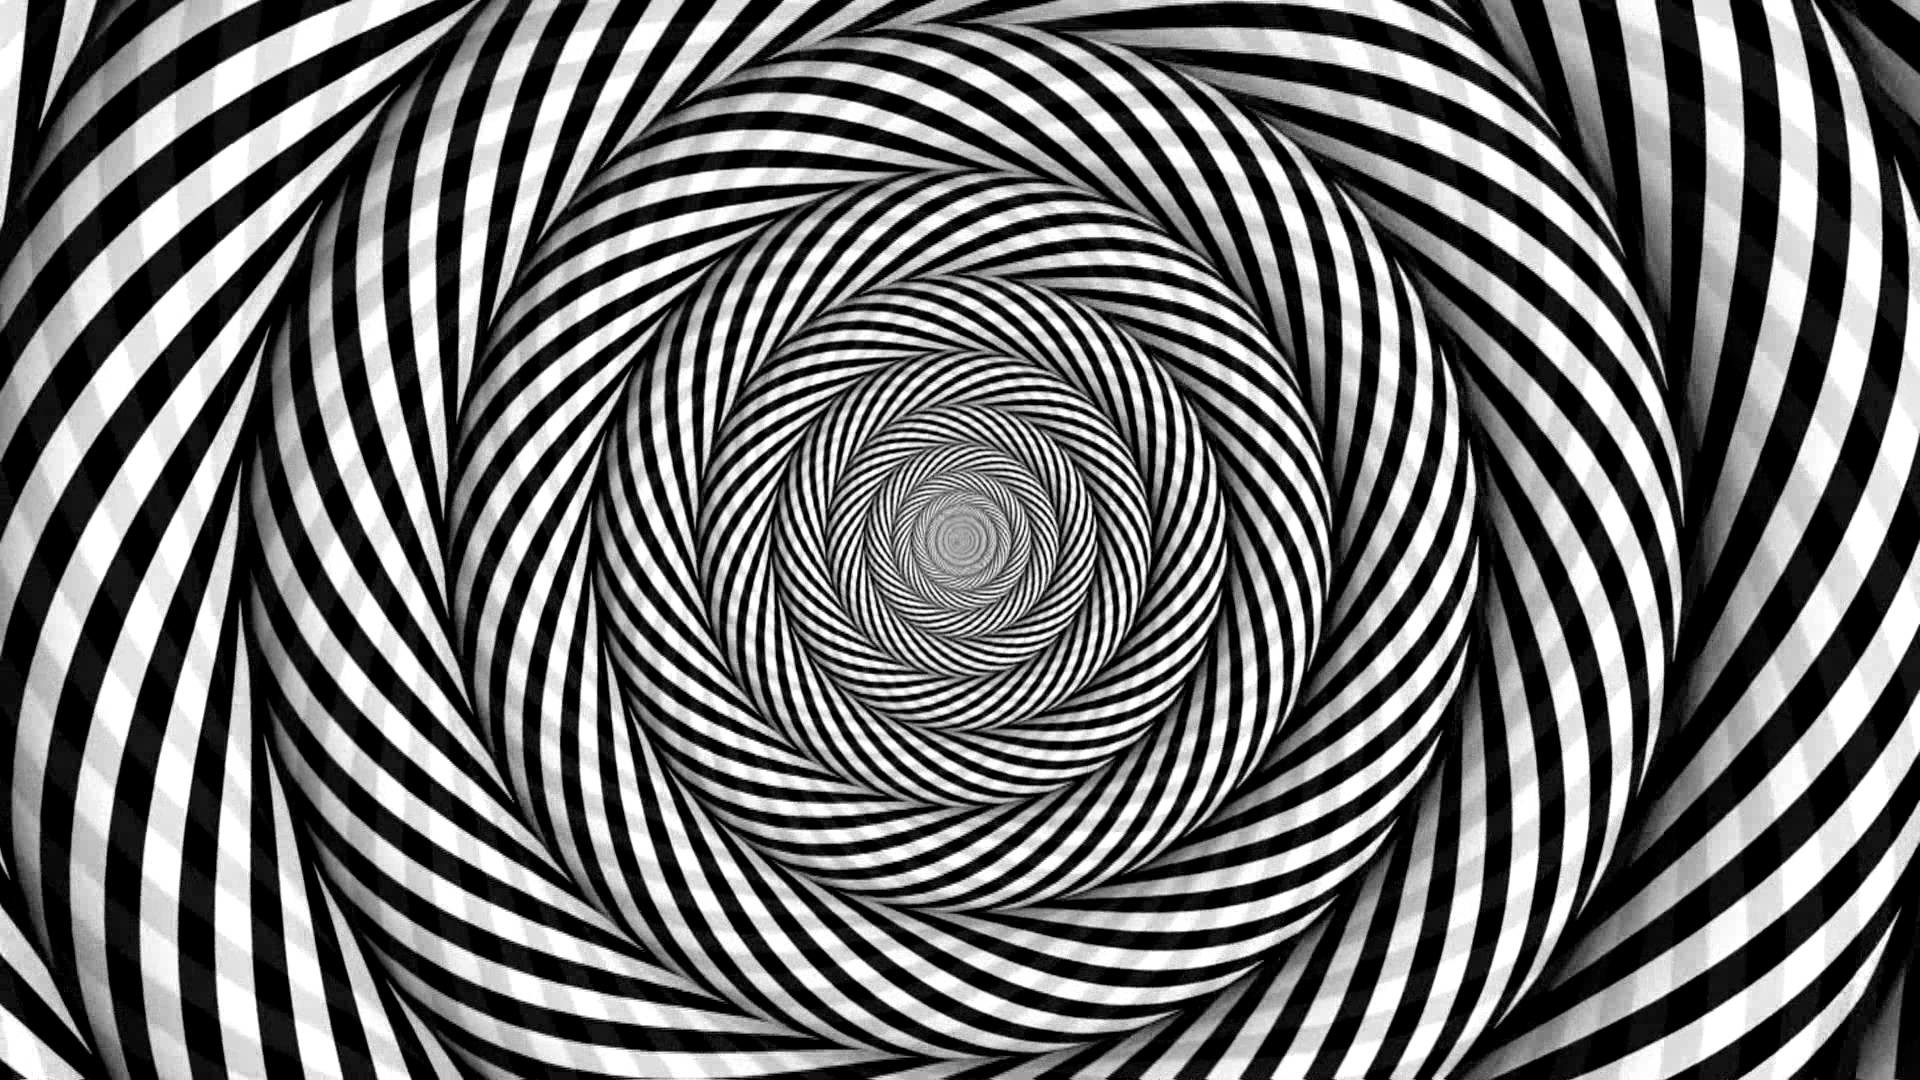 1920x1080 Ultra hi-res black and white striped ring array. Stare at the centre of the  image to reveal optical effects on your eyes. The ring will appear to zoom  in .